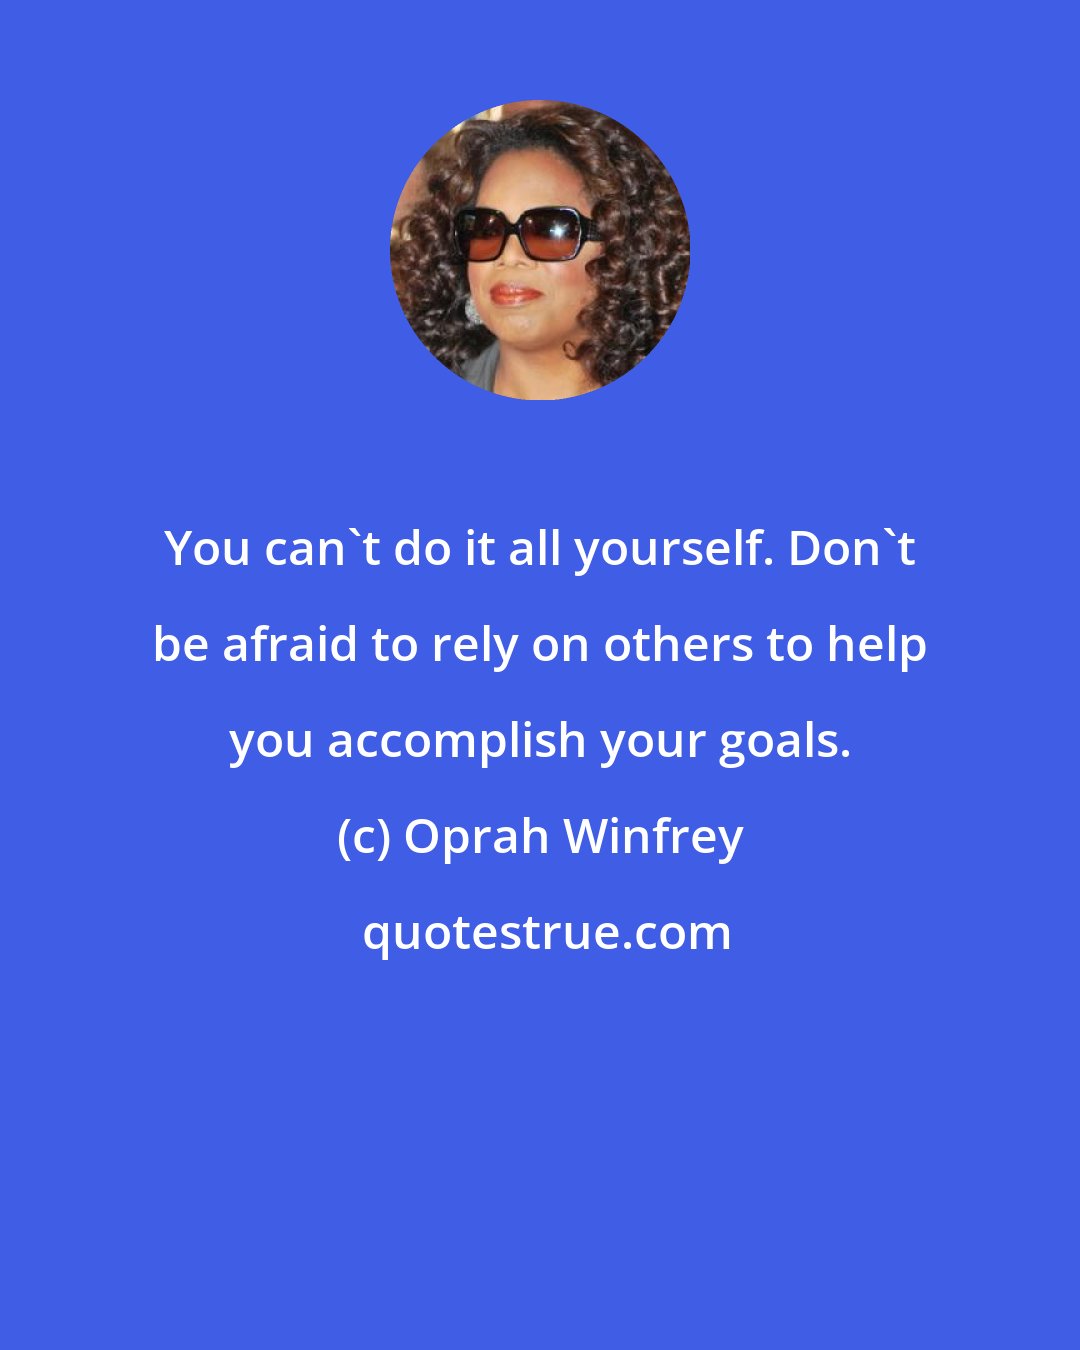 Oprah Winfrey: You can't do it all yourself. Don't be afraid to rely on others to help you accomplish your goals.